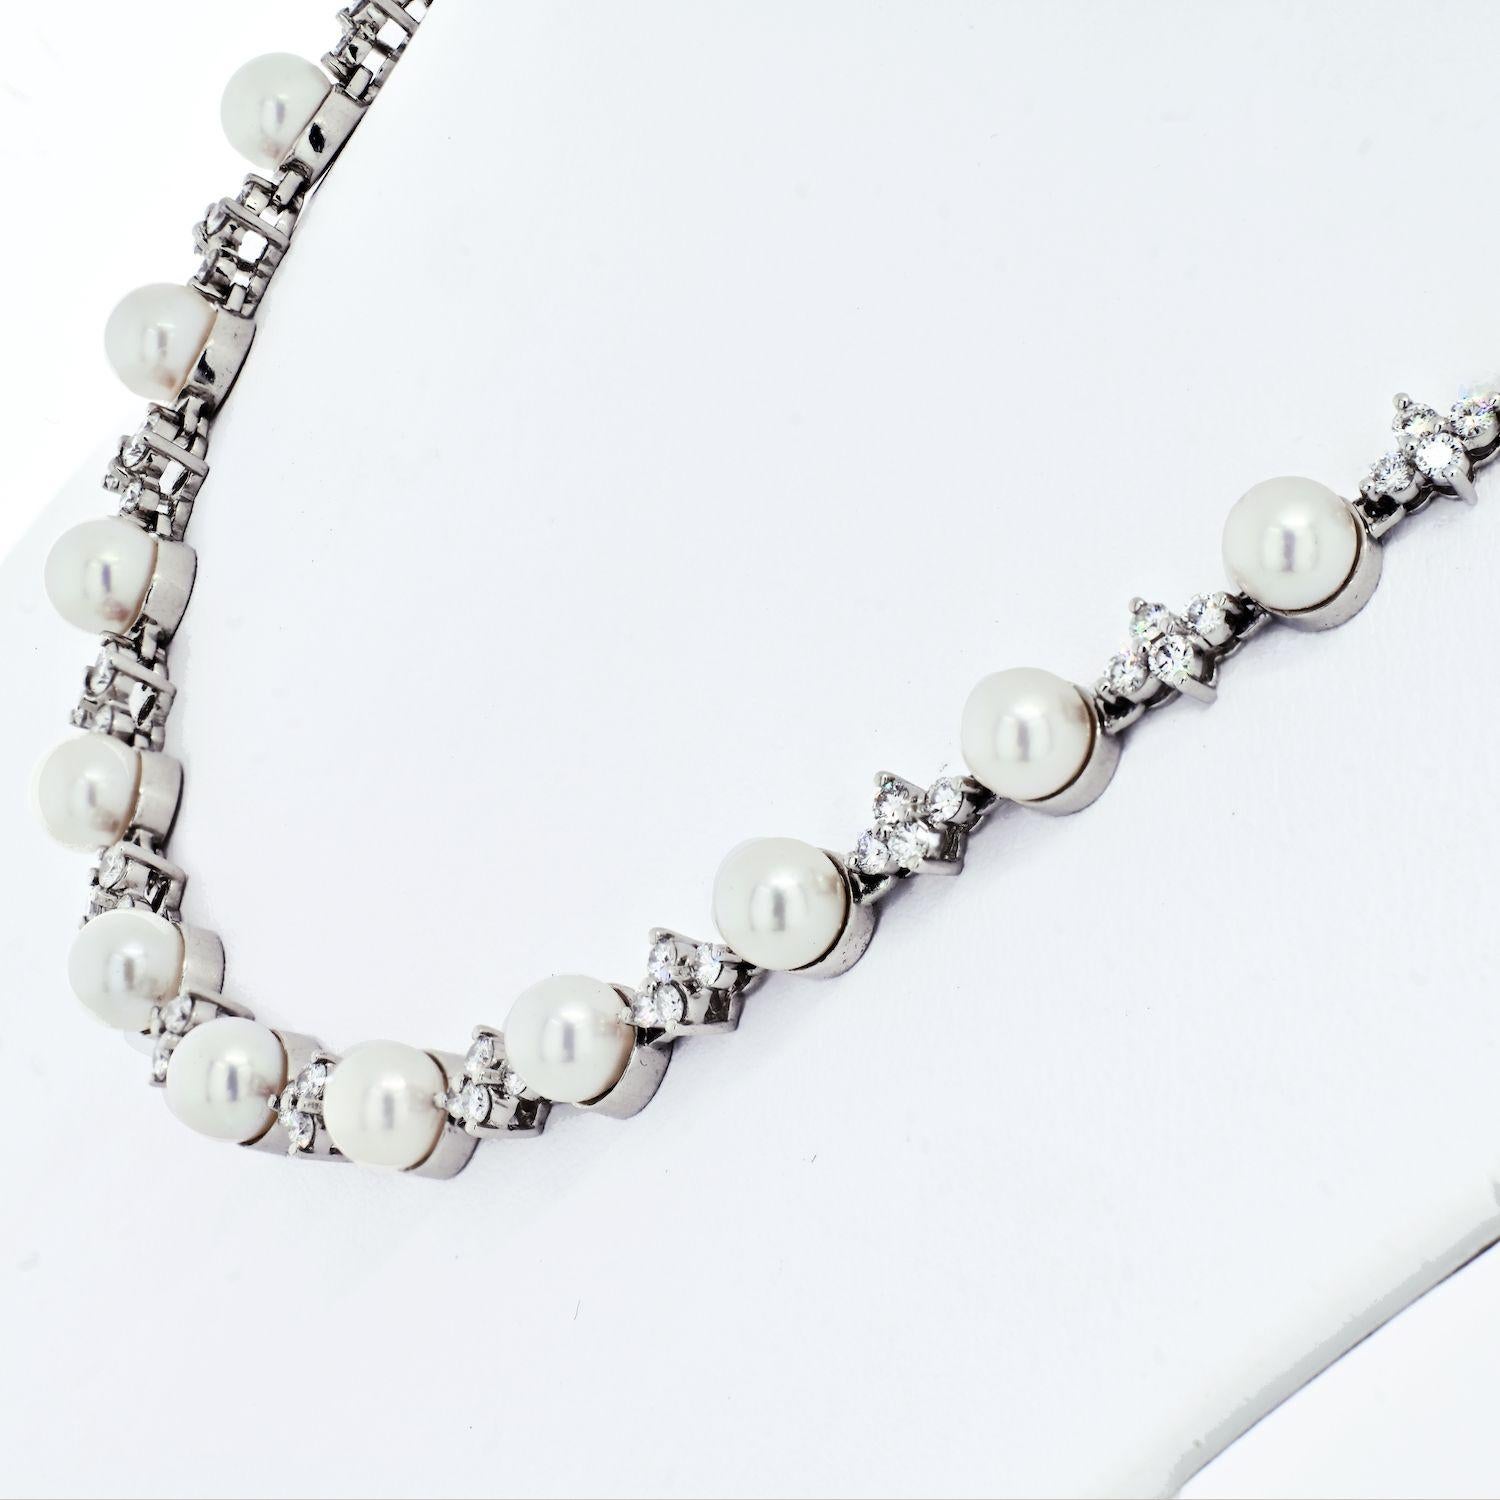 Inspired by the fire and radiance of our superlative diamonds, Tiffany & Co. uses a unique combination of cuts for a distinctly romantic sensibility. Timeless pearls and brilliant diamonds glow in this sophisticated necklace.

Platinum with